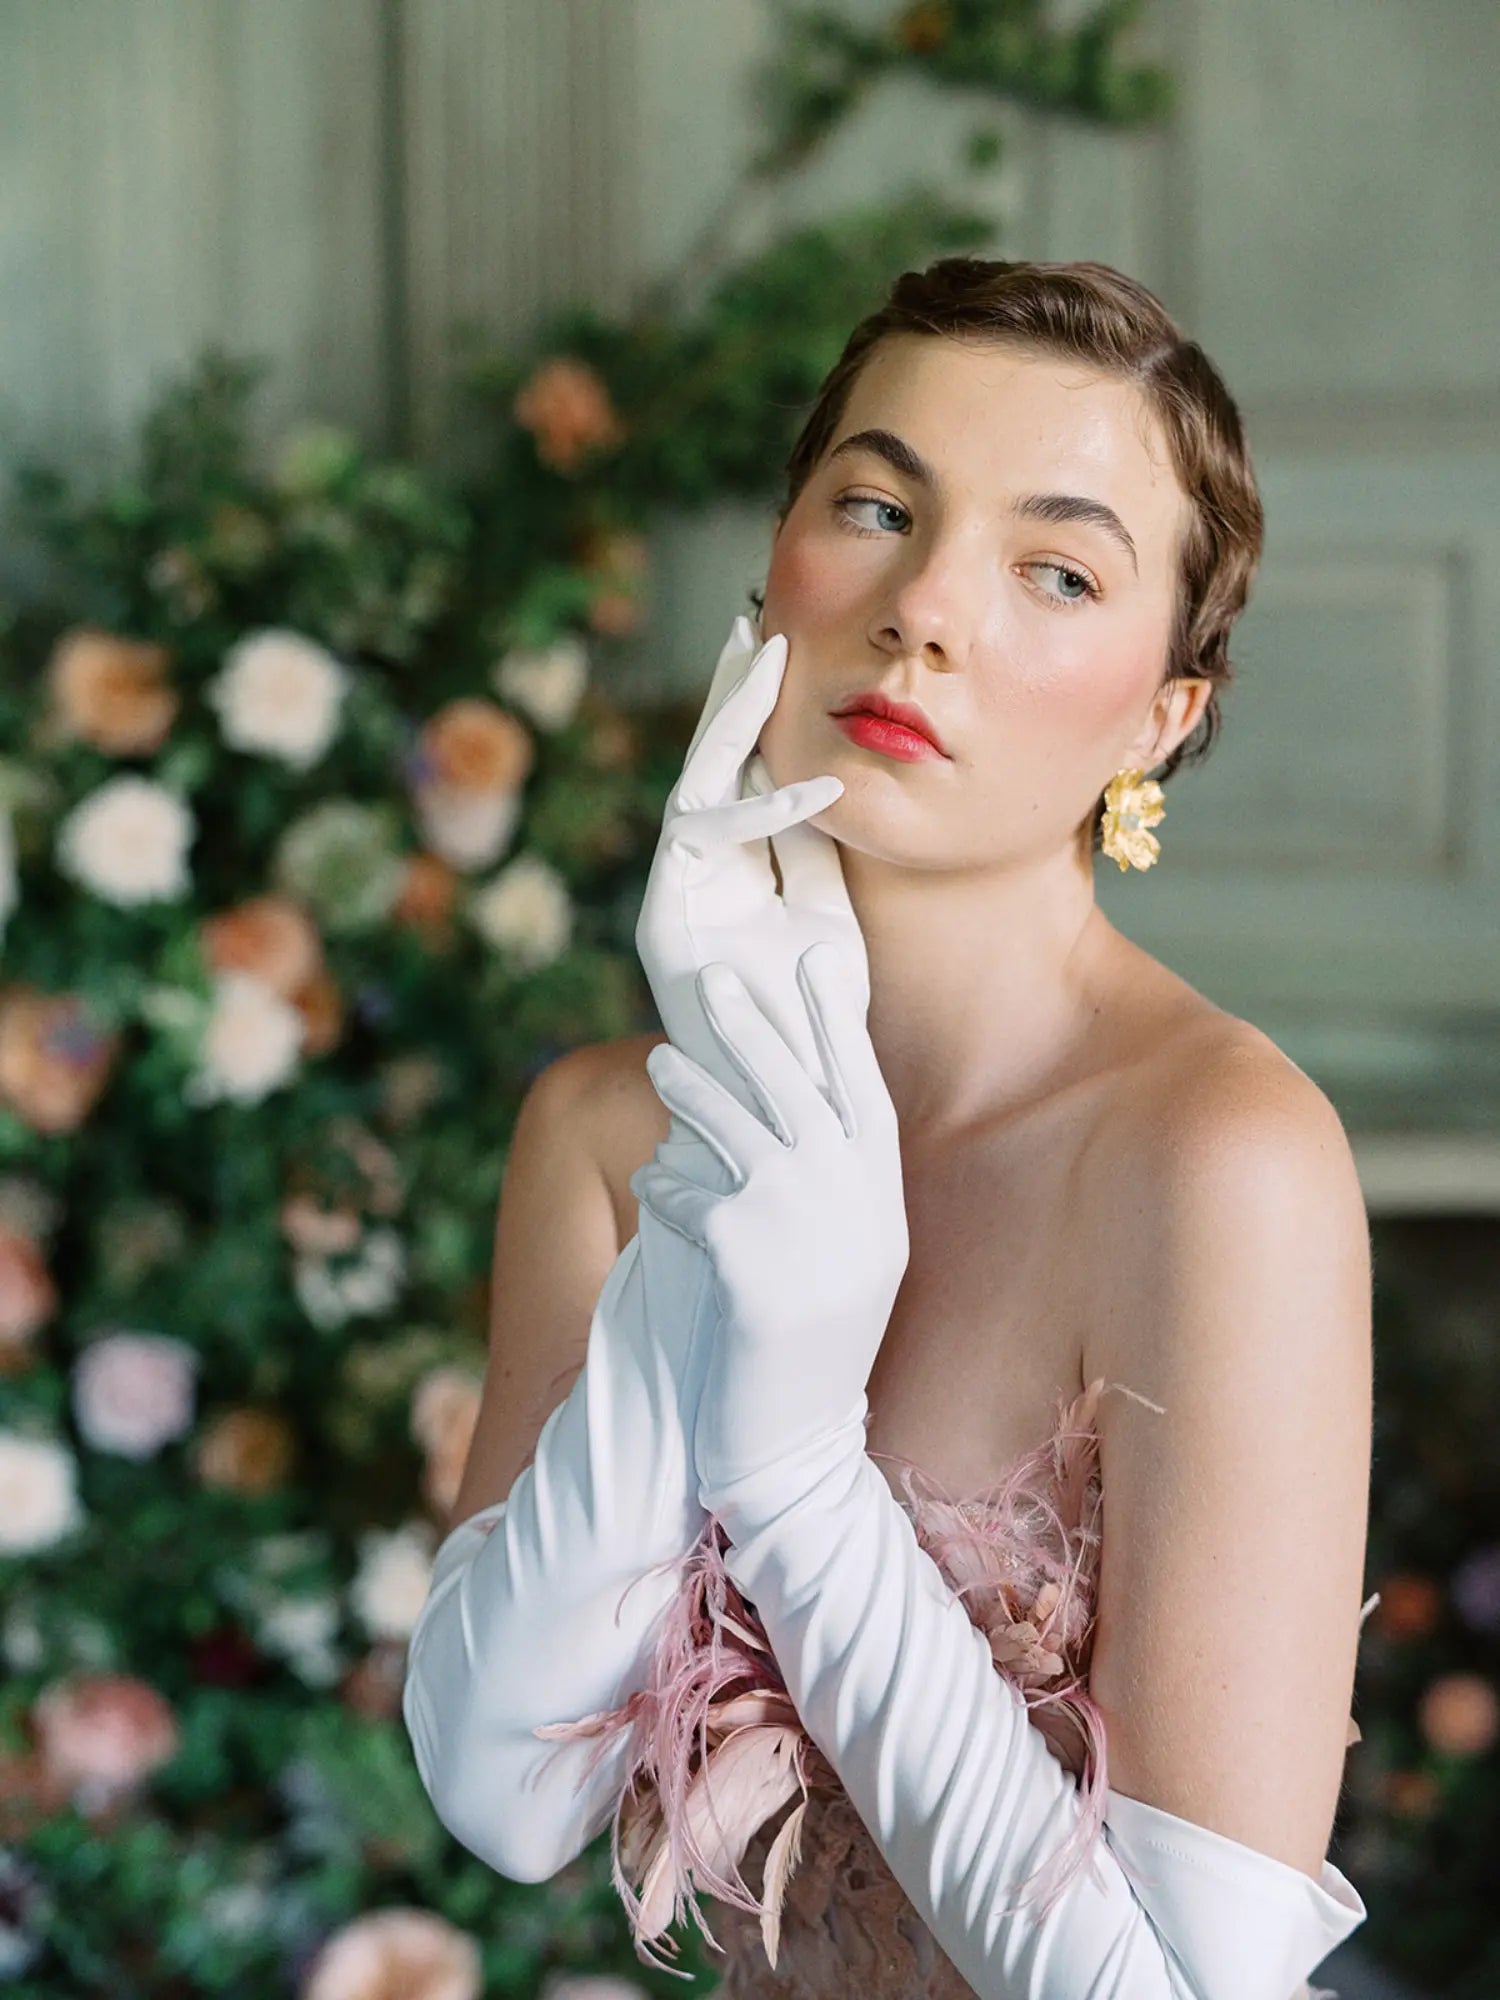 A woman in THE SUNNY - White Opera Gloves by LadyFinch exuding high-fashion elegance while posing for a photo at formal events.